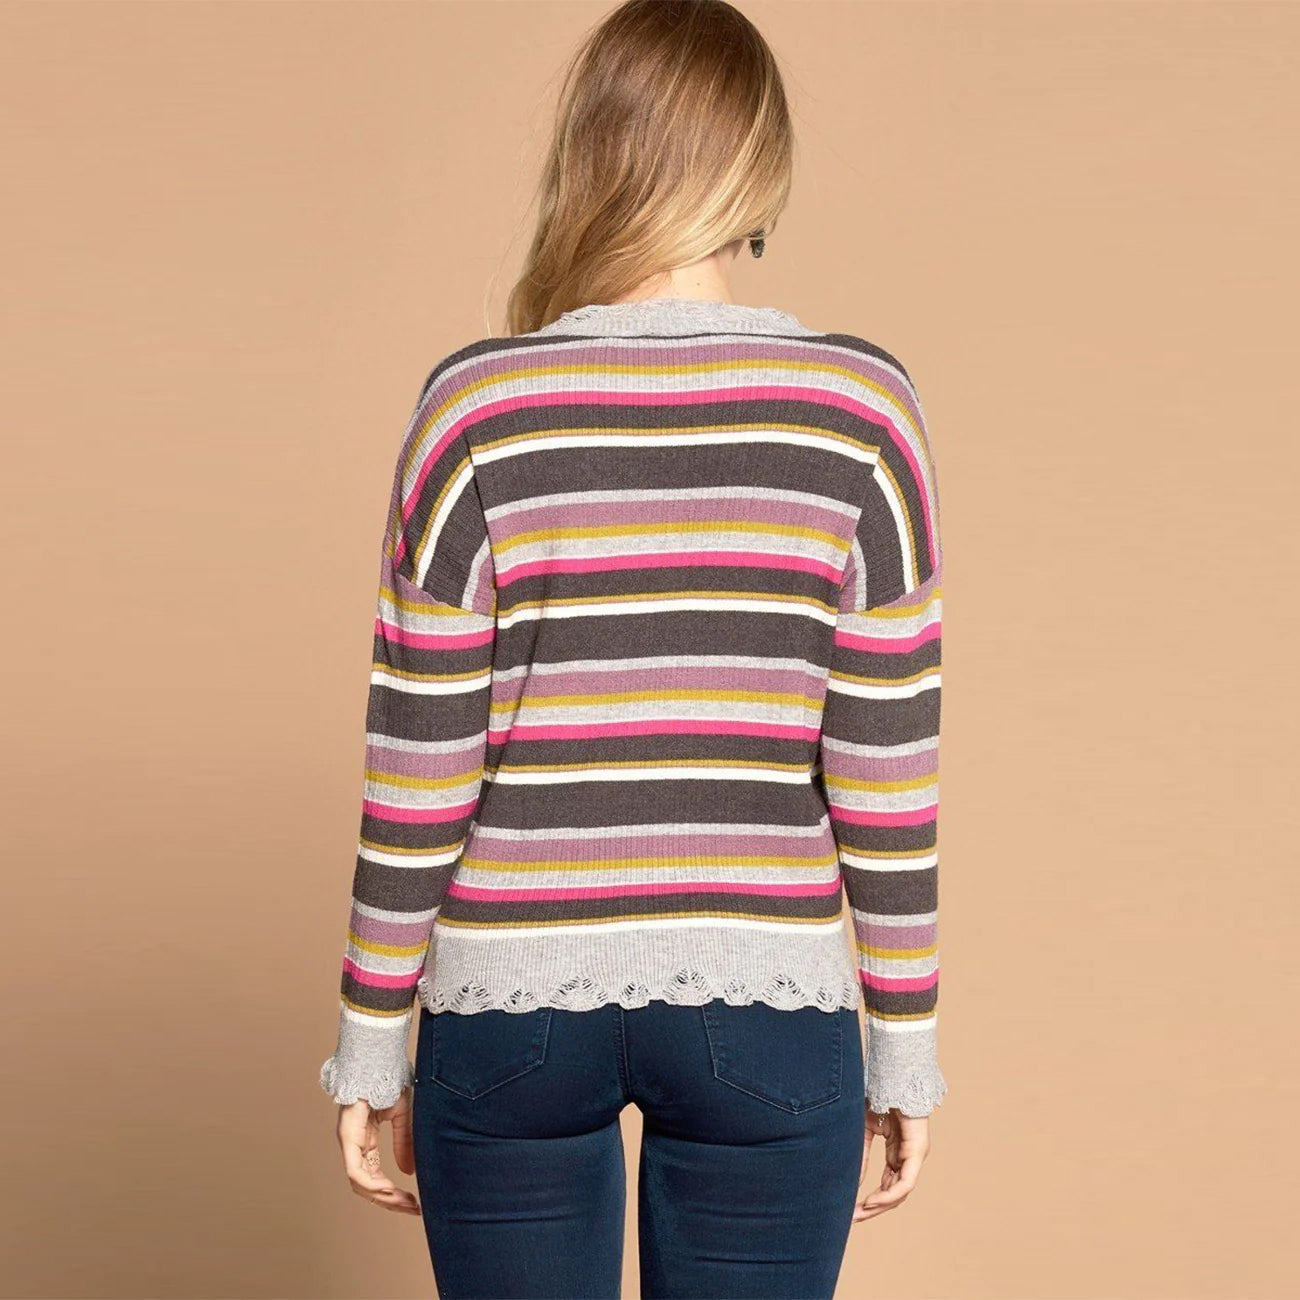 Multi-colored Variegated Striped Knit Sweater